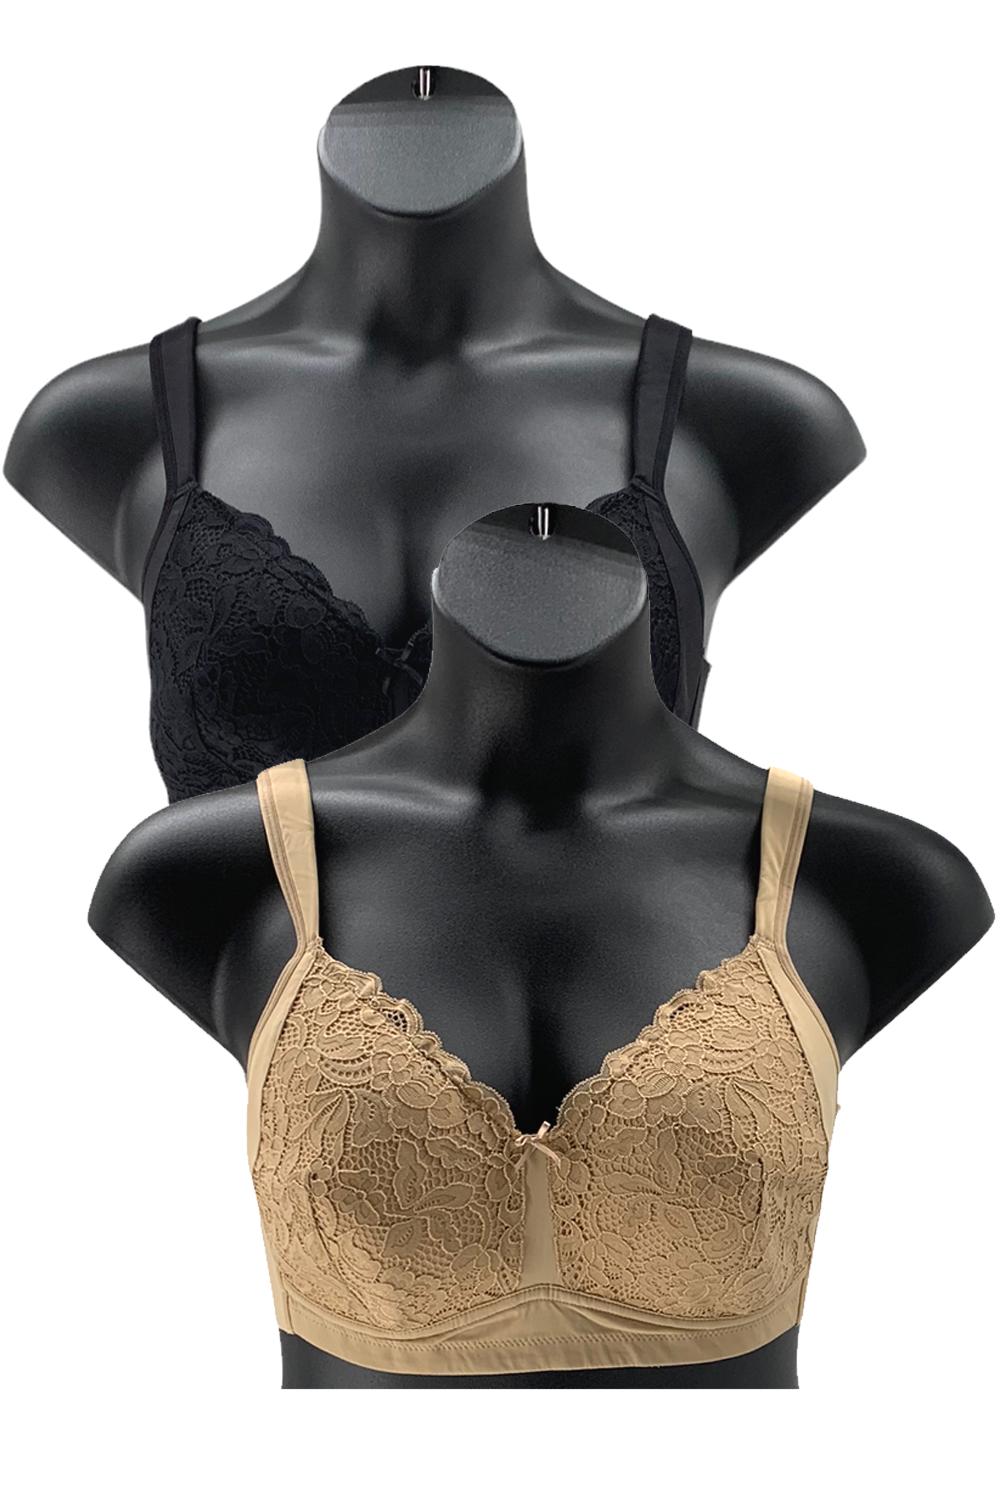 Rhonda Shear 2-pack Molded Cup Bra with Lace Back